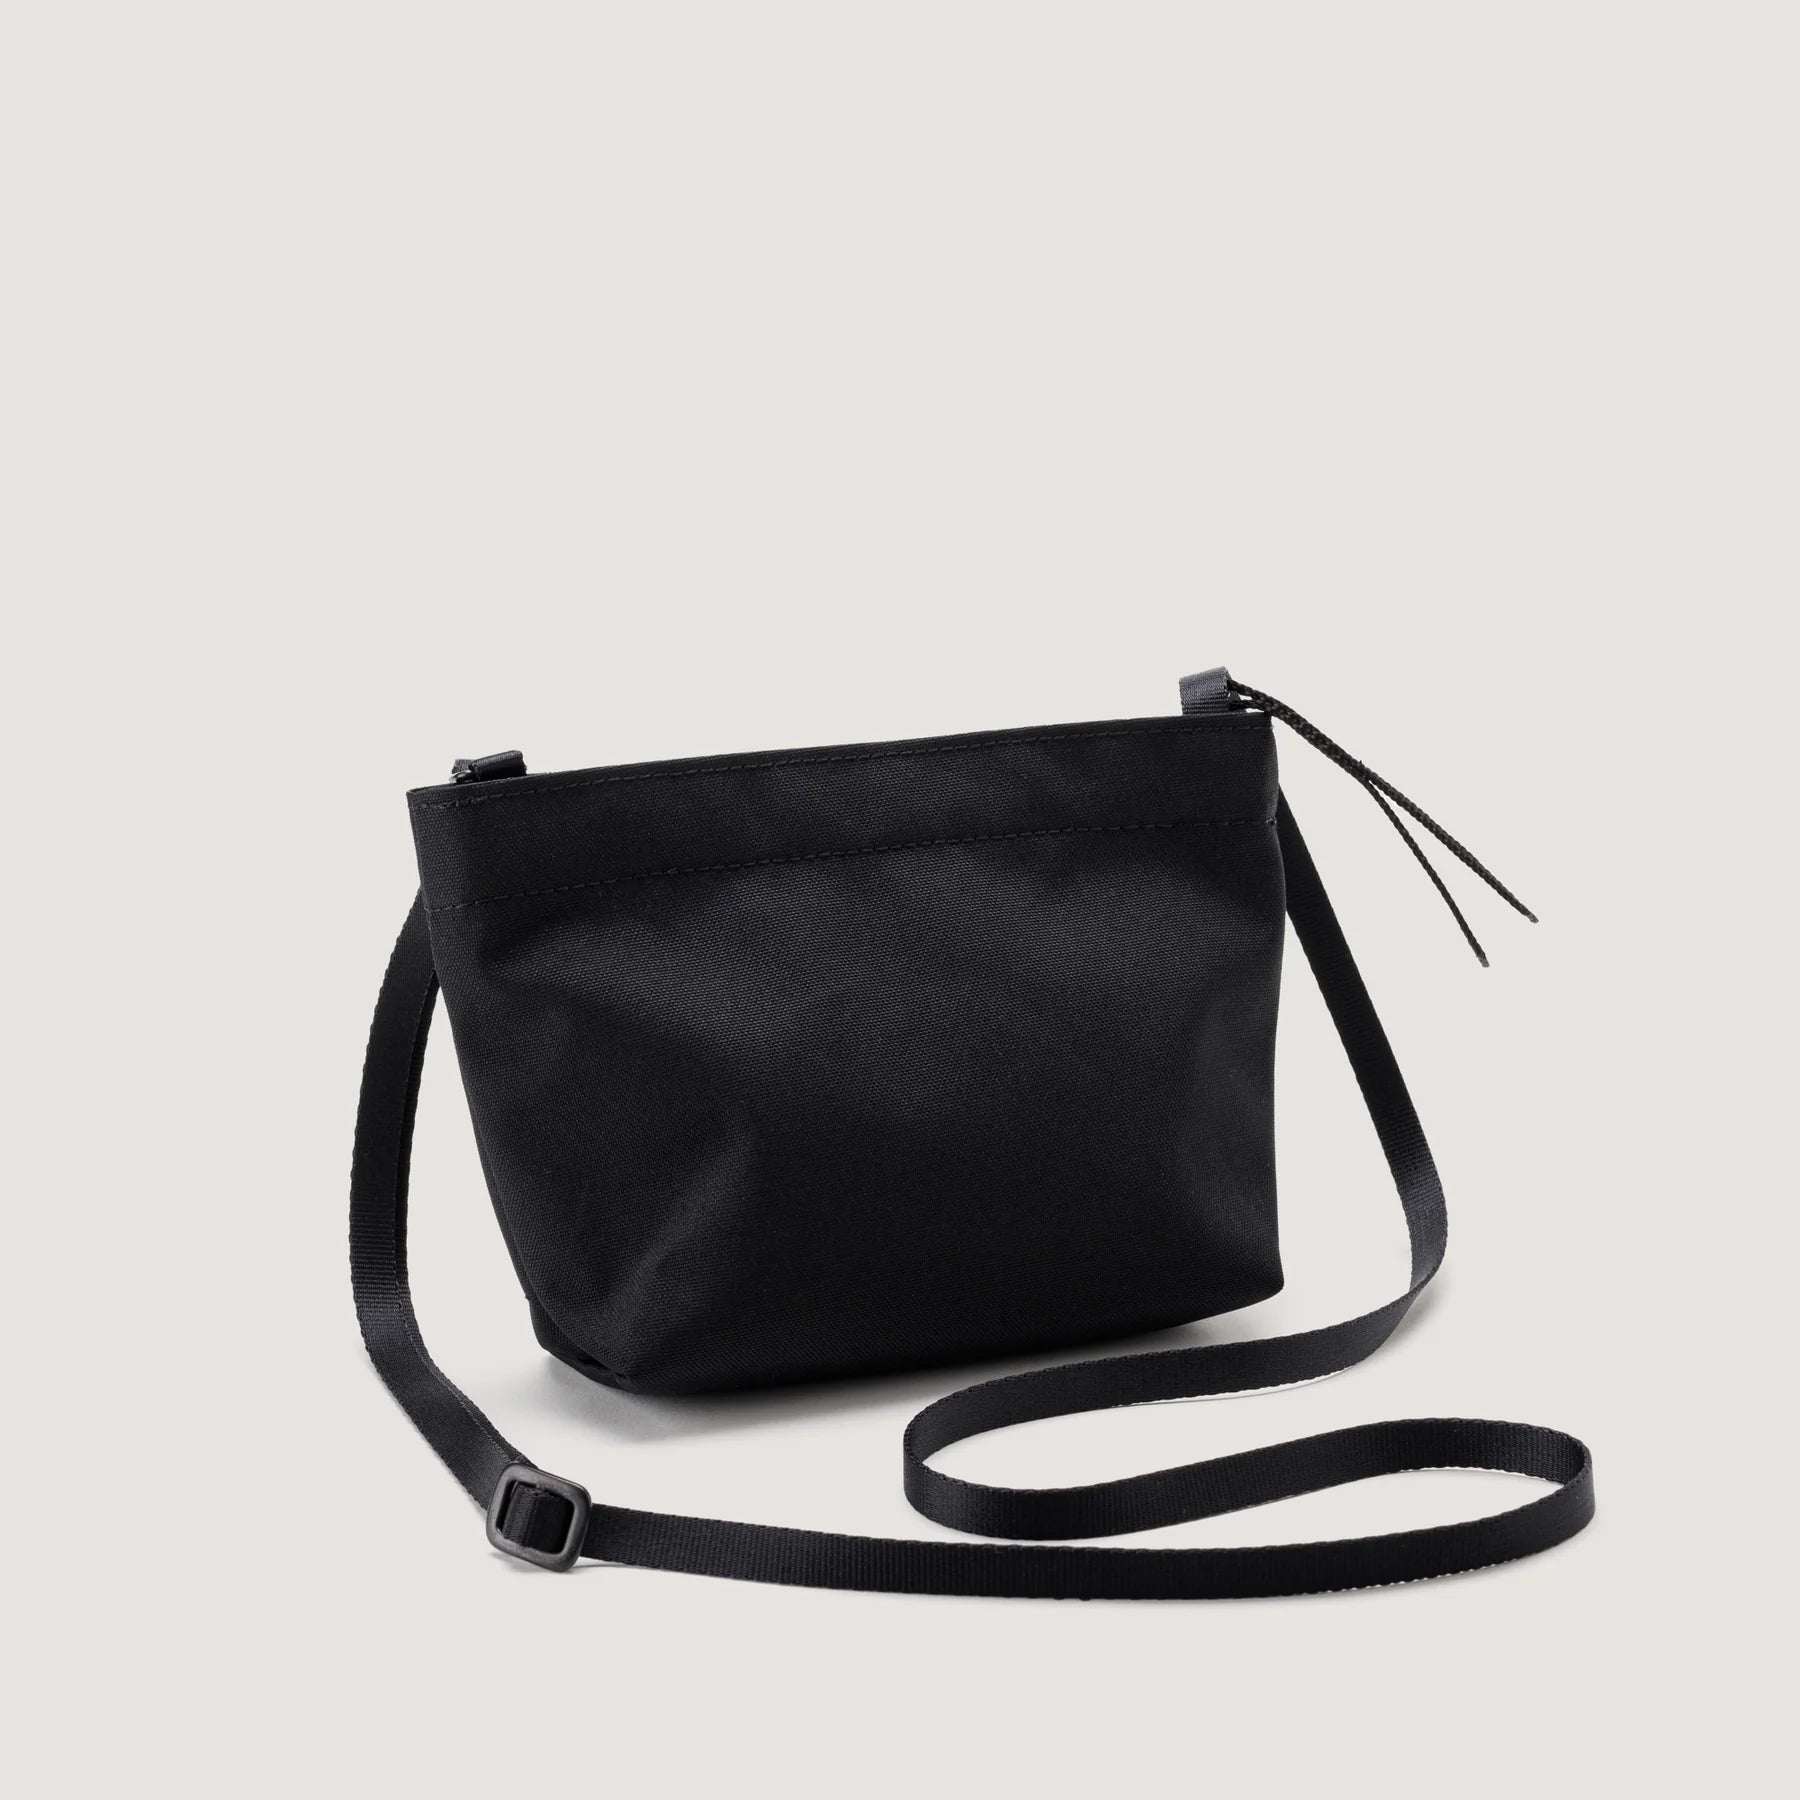 A black Zipper Pouch Mini crossbody bag with an adjustable strap and a tassel on a white background by Bags in Progress.